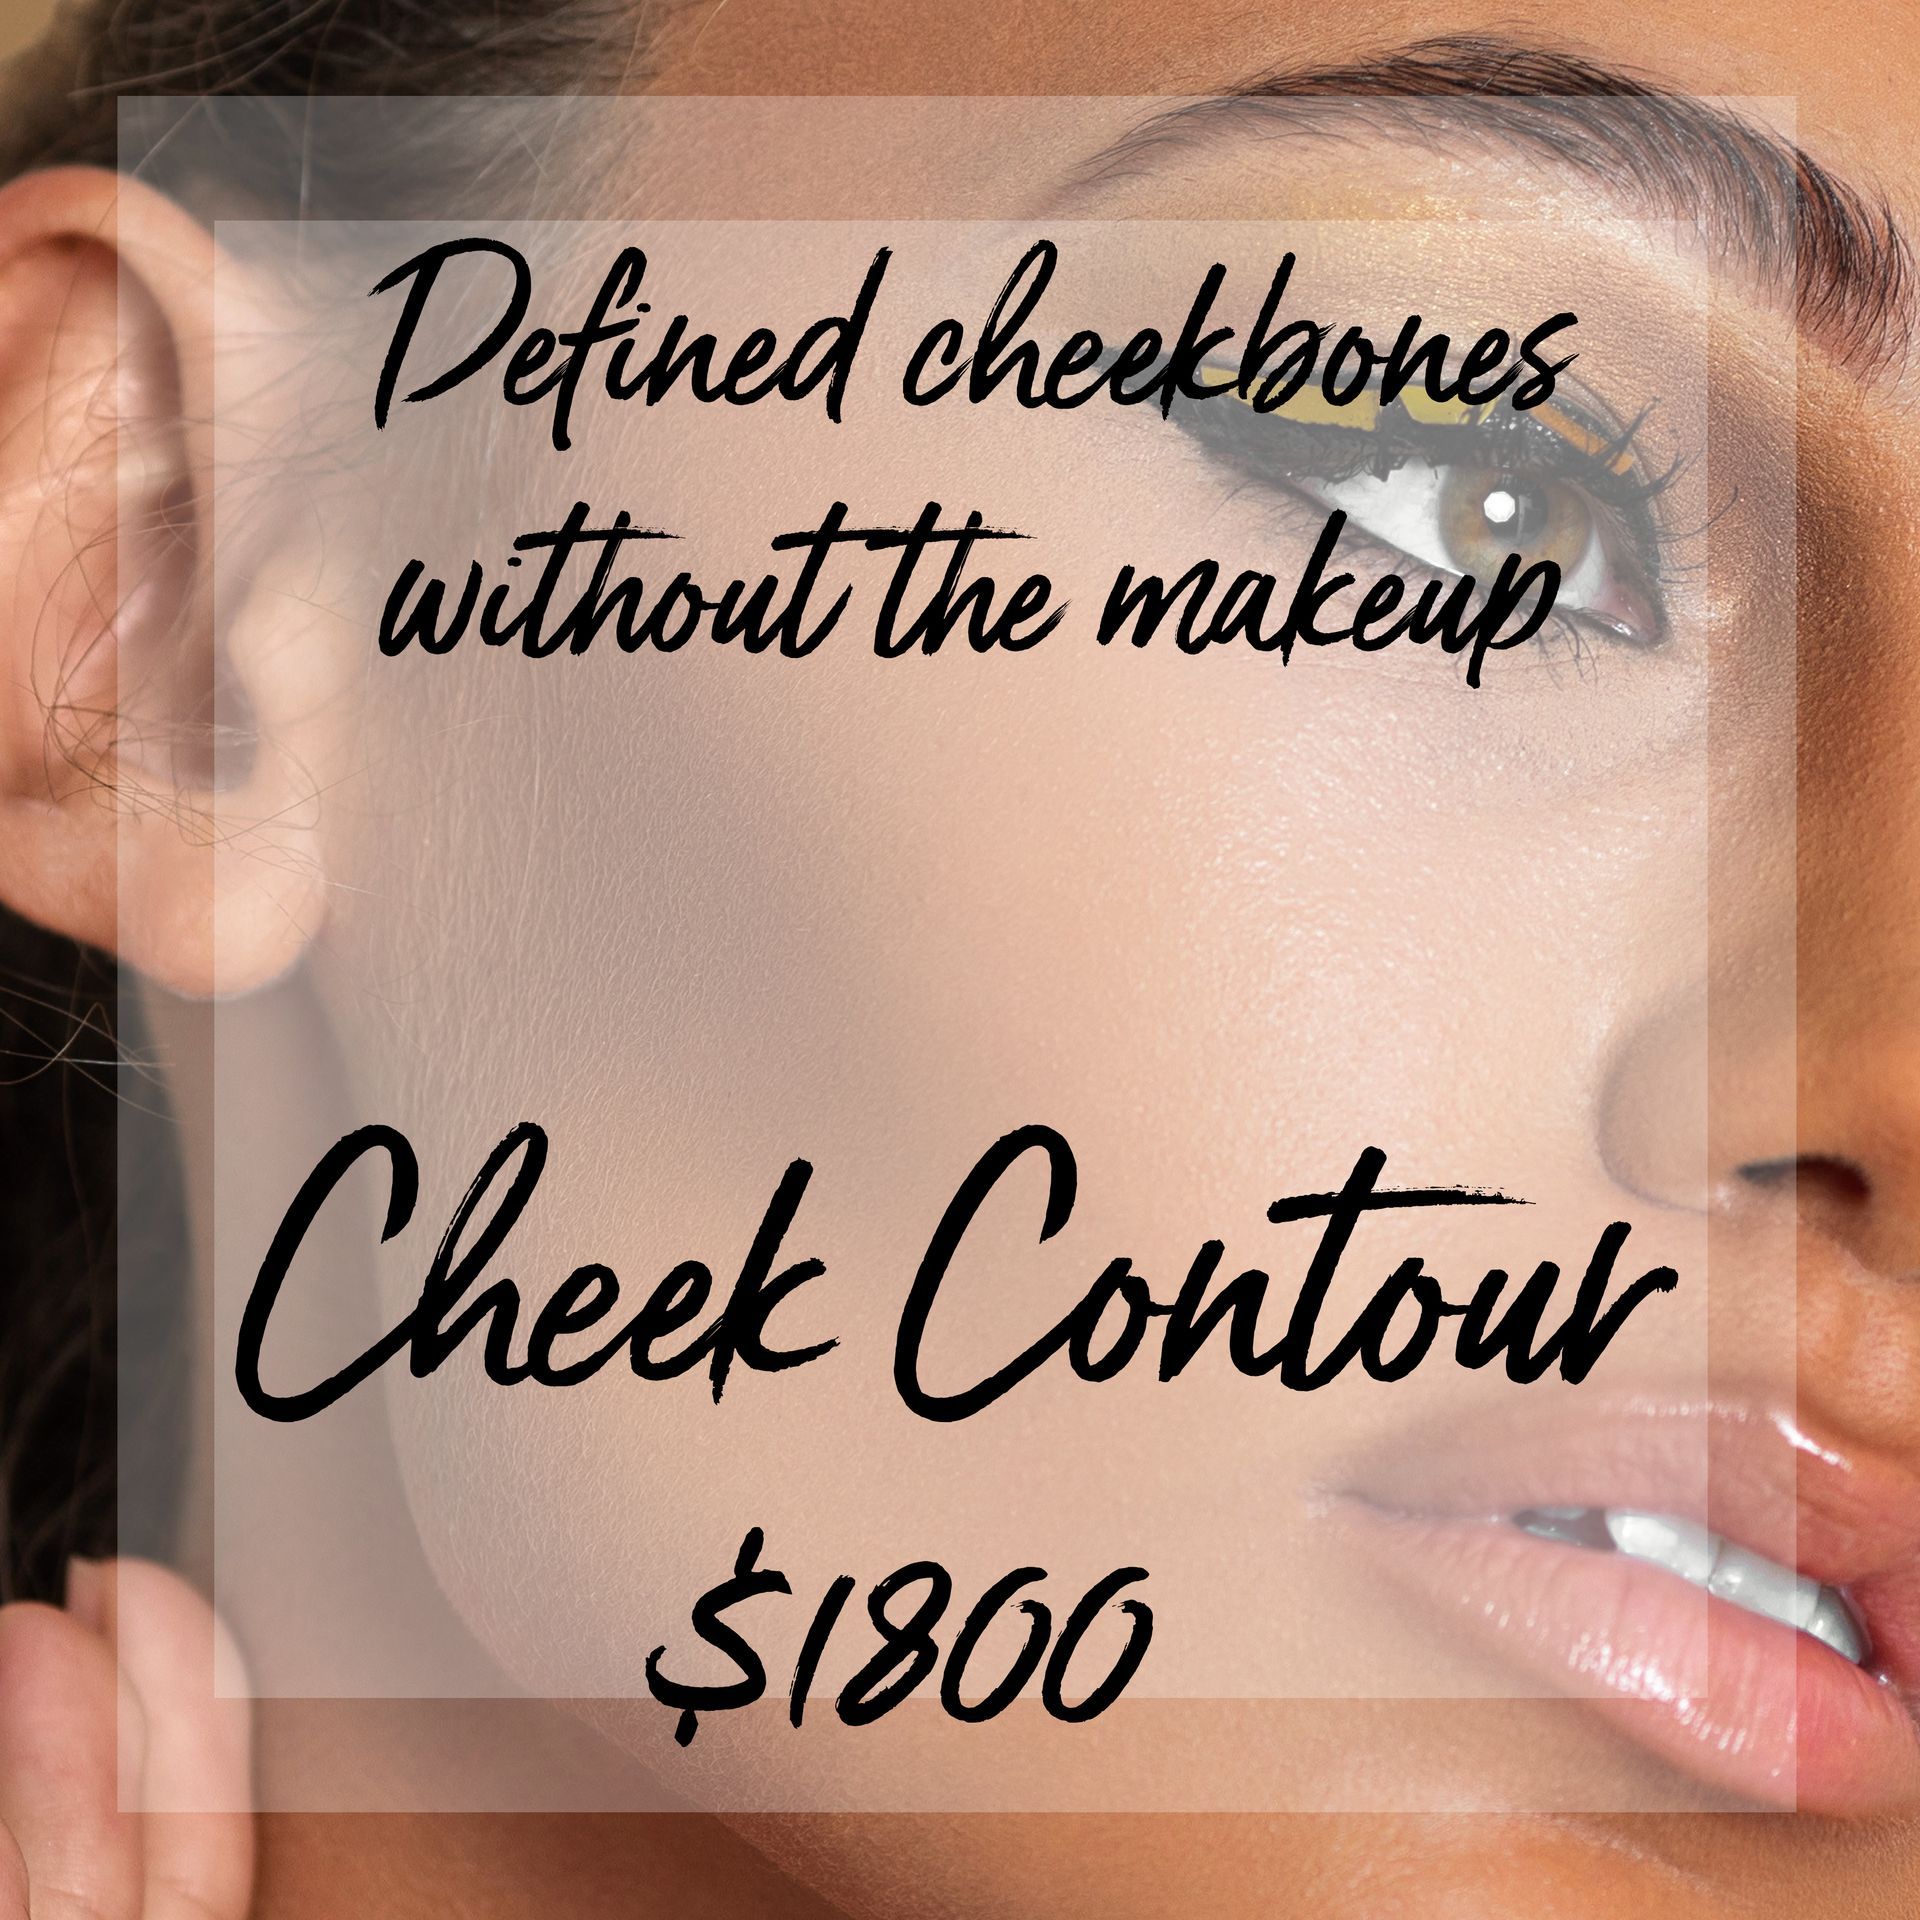 A close up of a woman 's face with the words defined cheekbones without the makeup cheek contour $ 1800